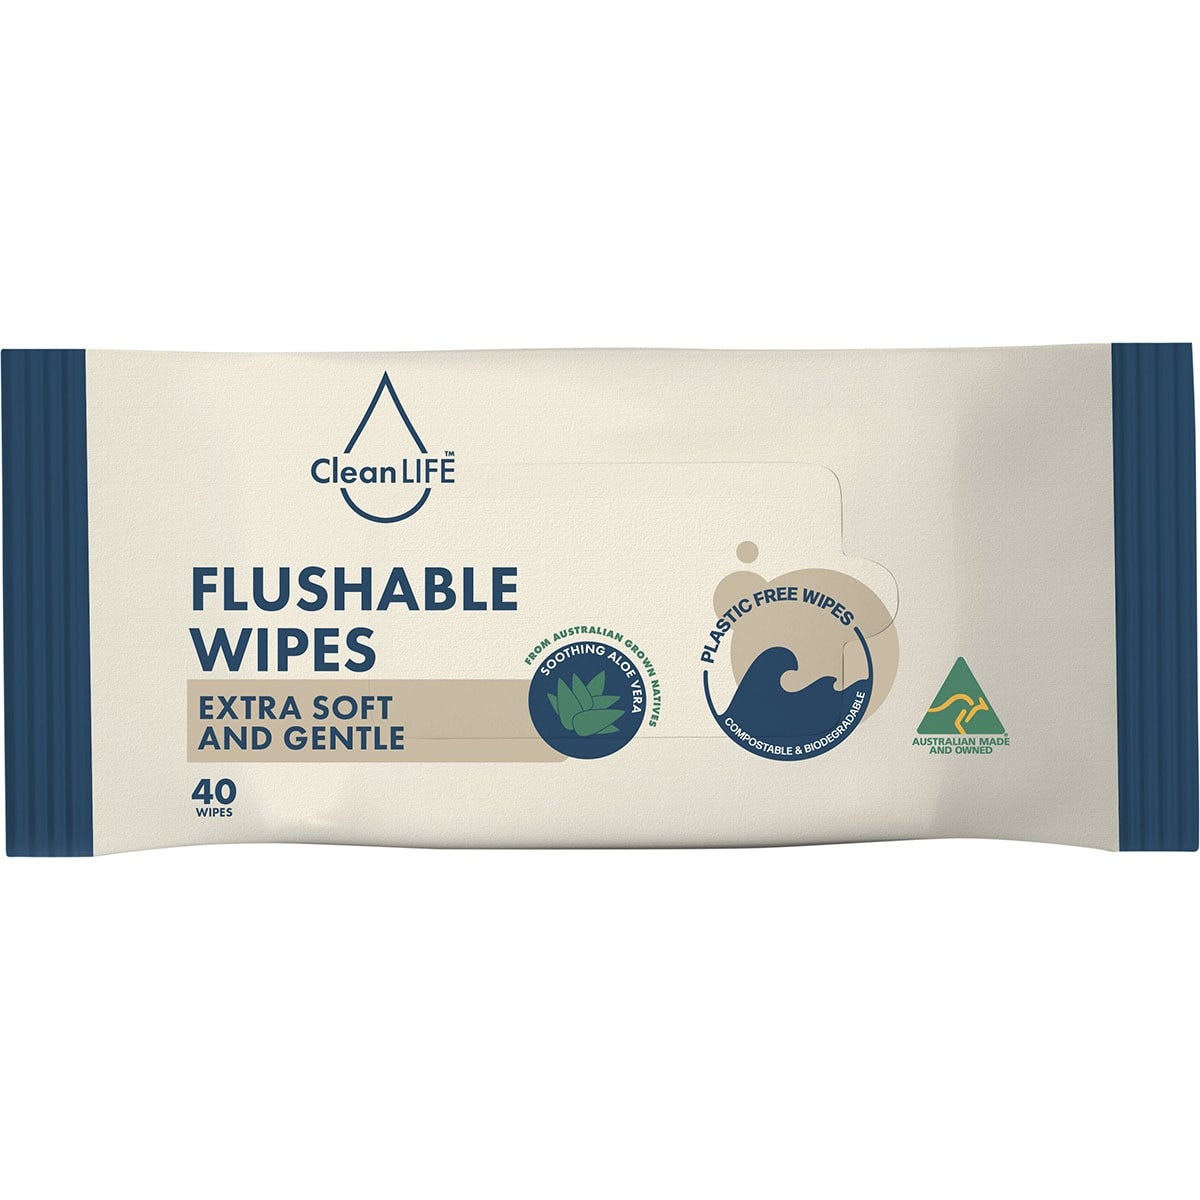 CleanLIFE Flushable Plastic Free Wipes Extra Soft and Gentle 40pk - Dr Earth - Skincare